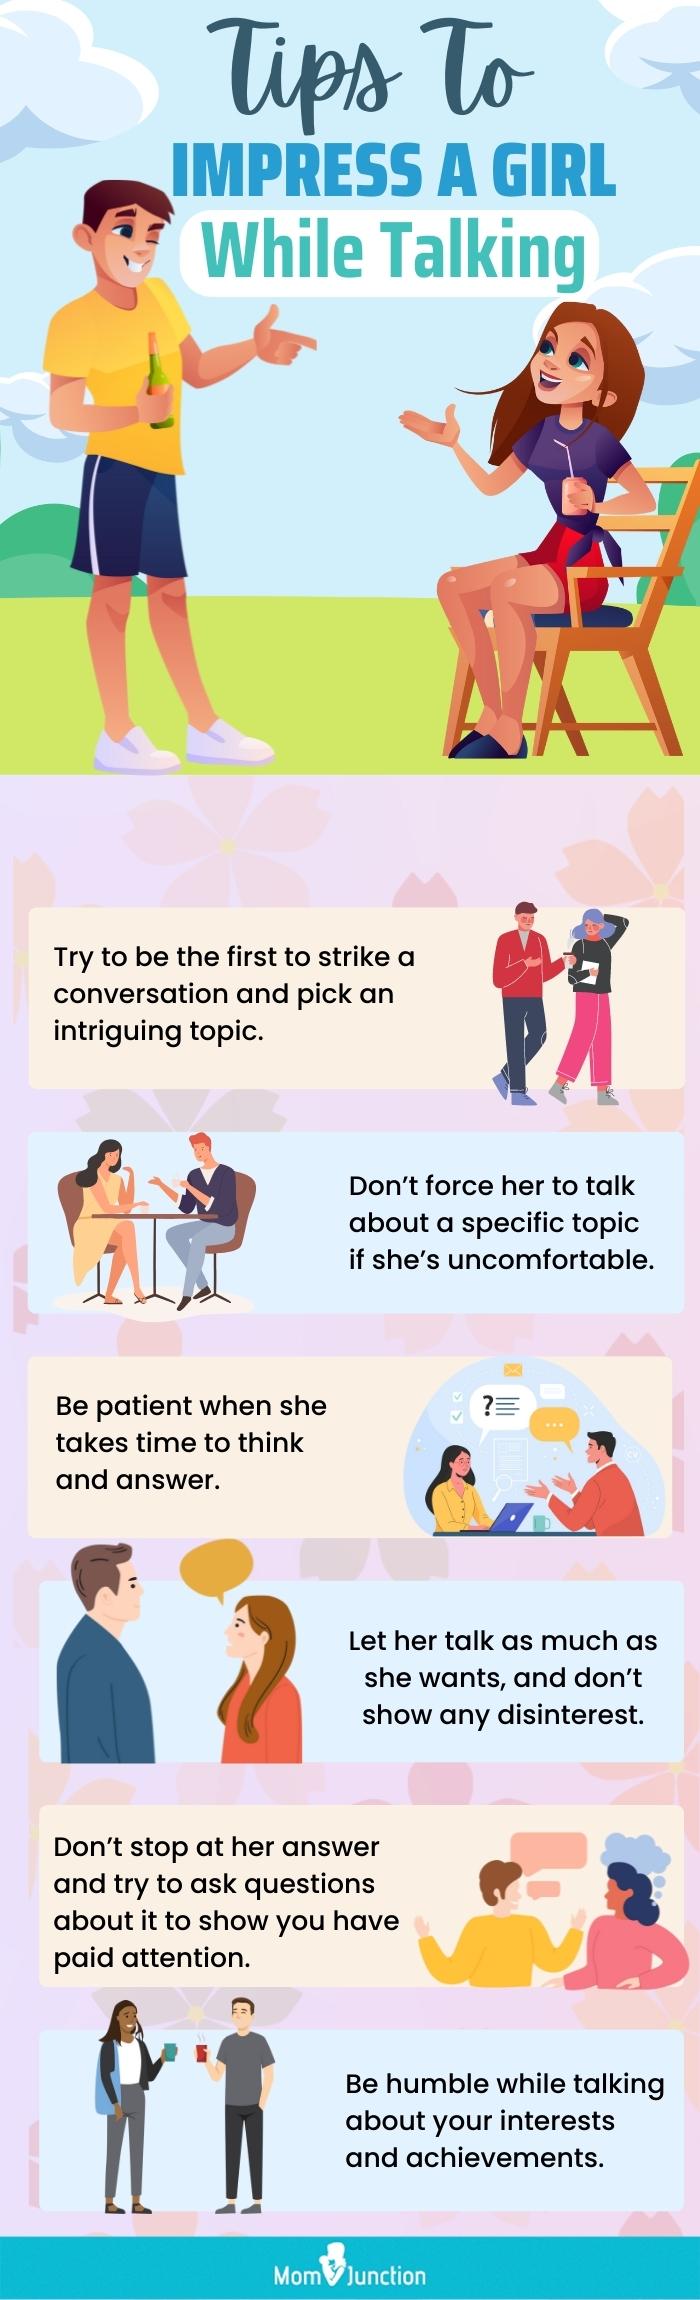 12 Tips To Impress A Female Colleague And Win Her Over